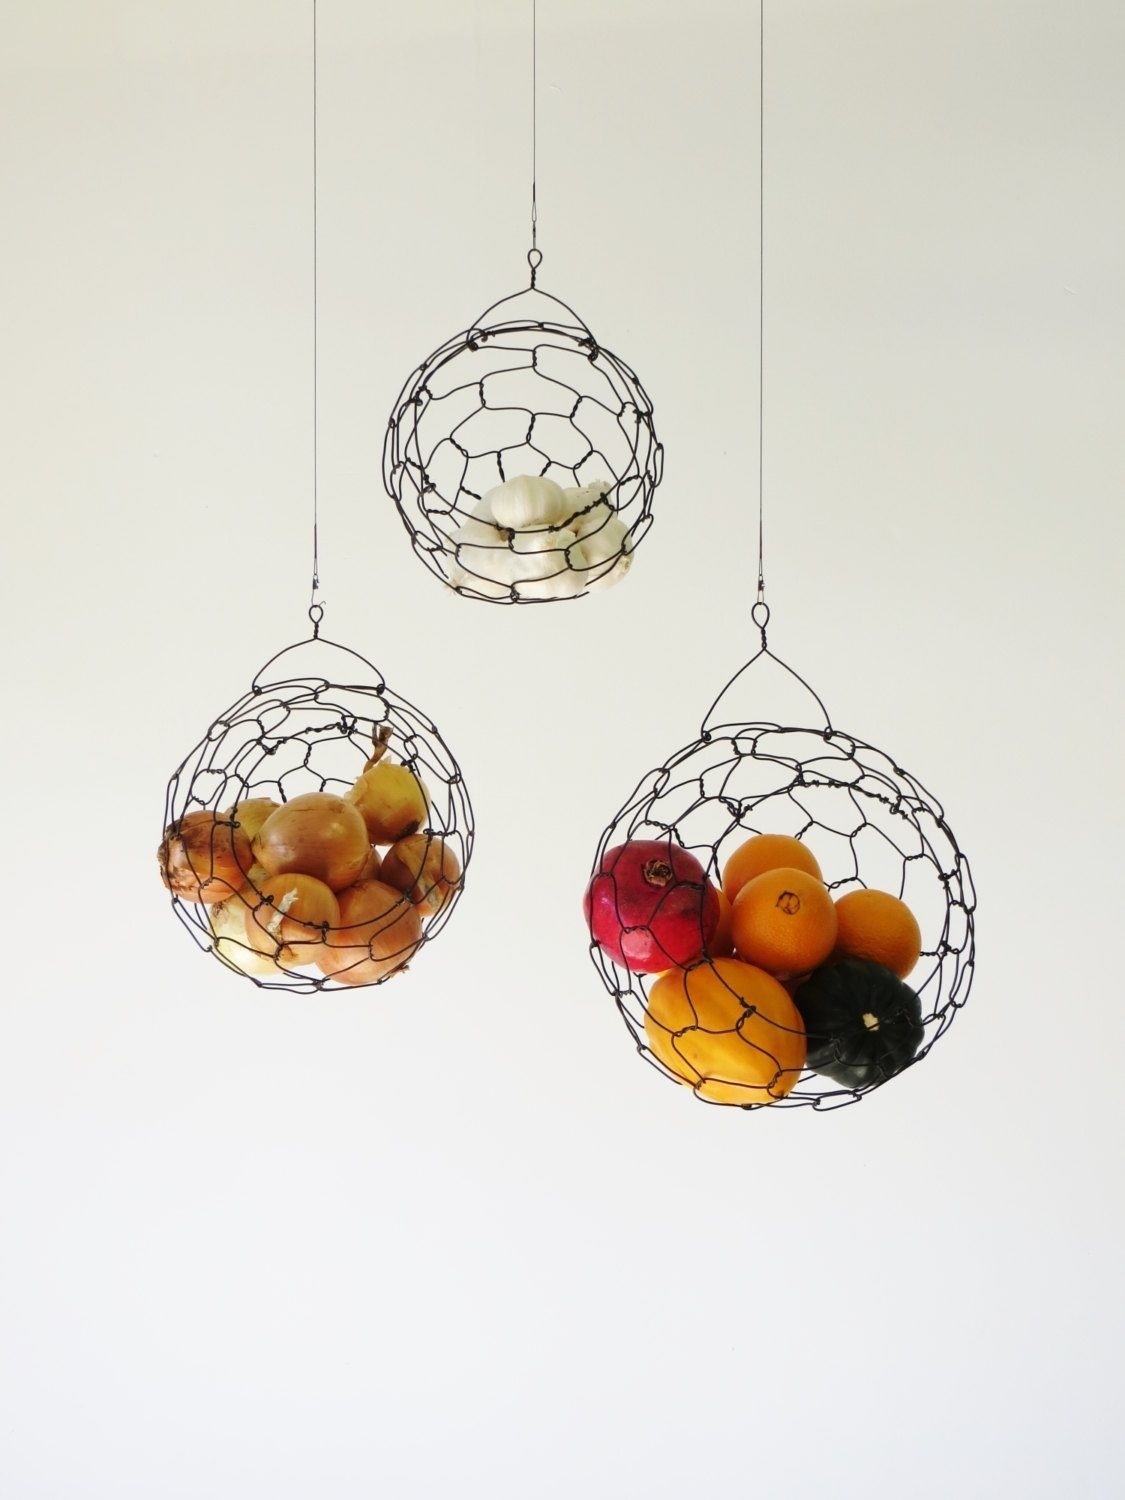 Hanging wire fruit or vegetable sphere